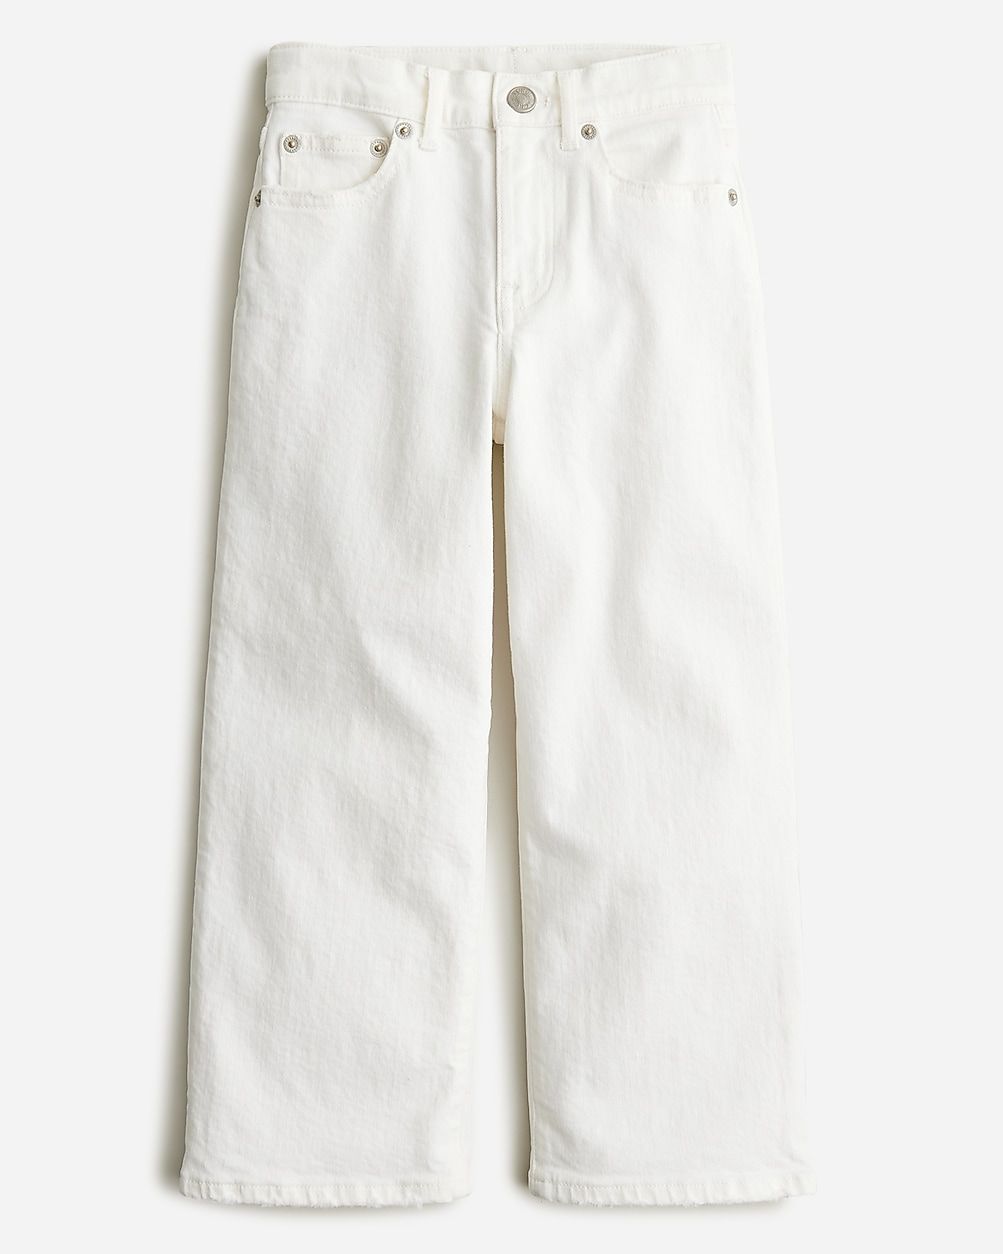 How to wear ittop rated4.8(5 REVIEWS)Girls' slim wide-leg jean in white$34.50-$44.50$69.50Limited... | J.Crew US